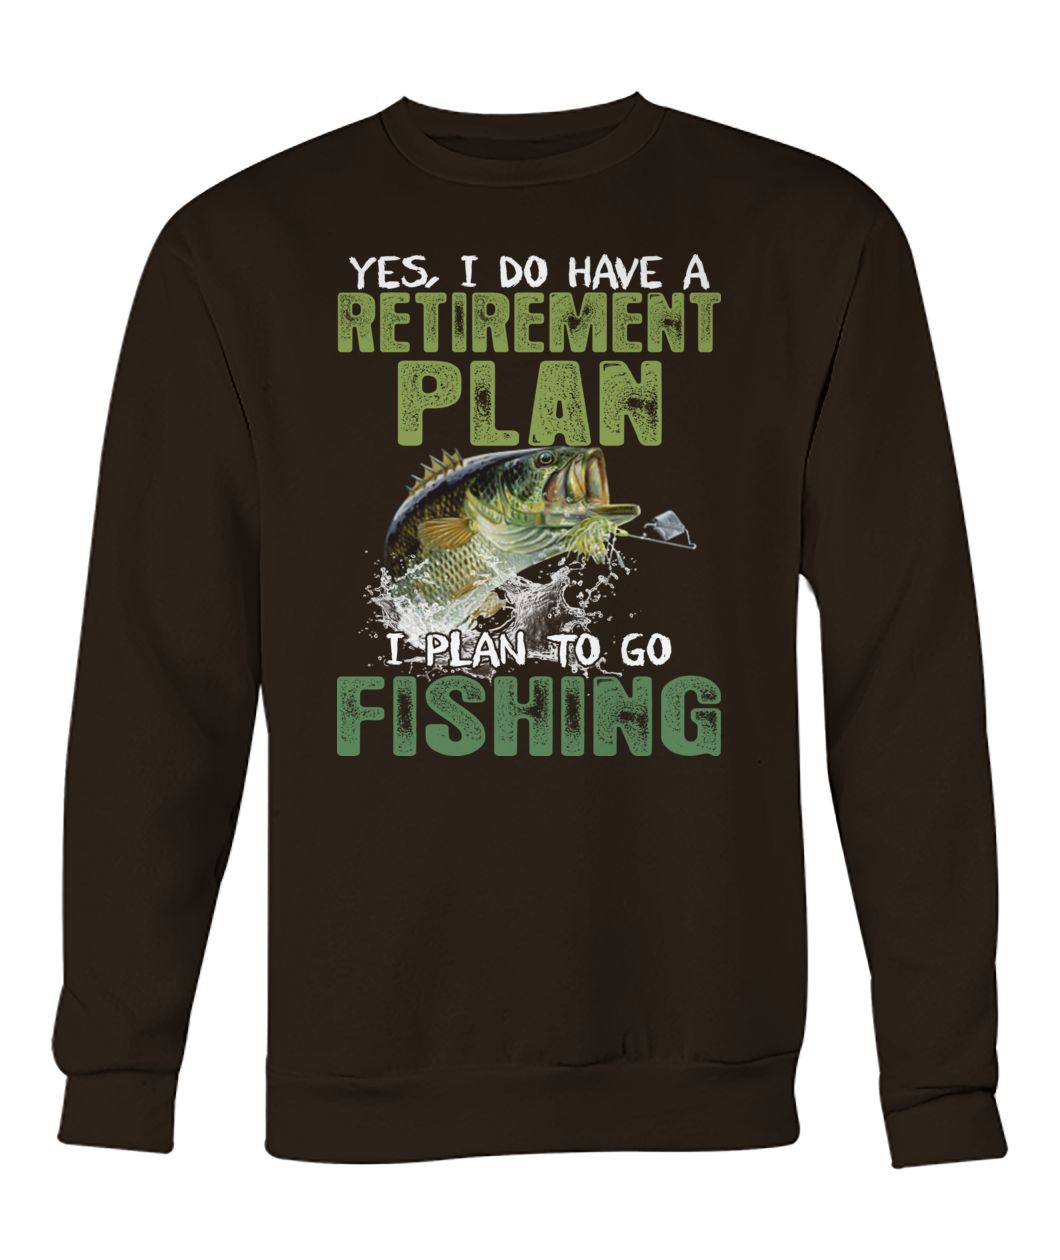 Yes I do have a retirement plan I plan to go fishing crew neck sweatshirt